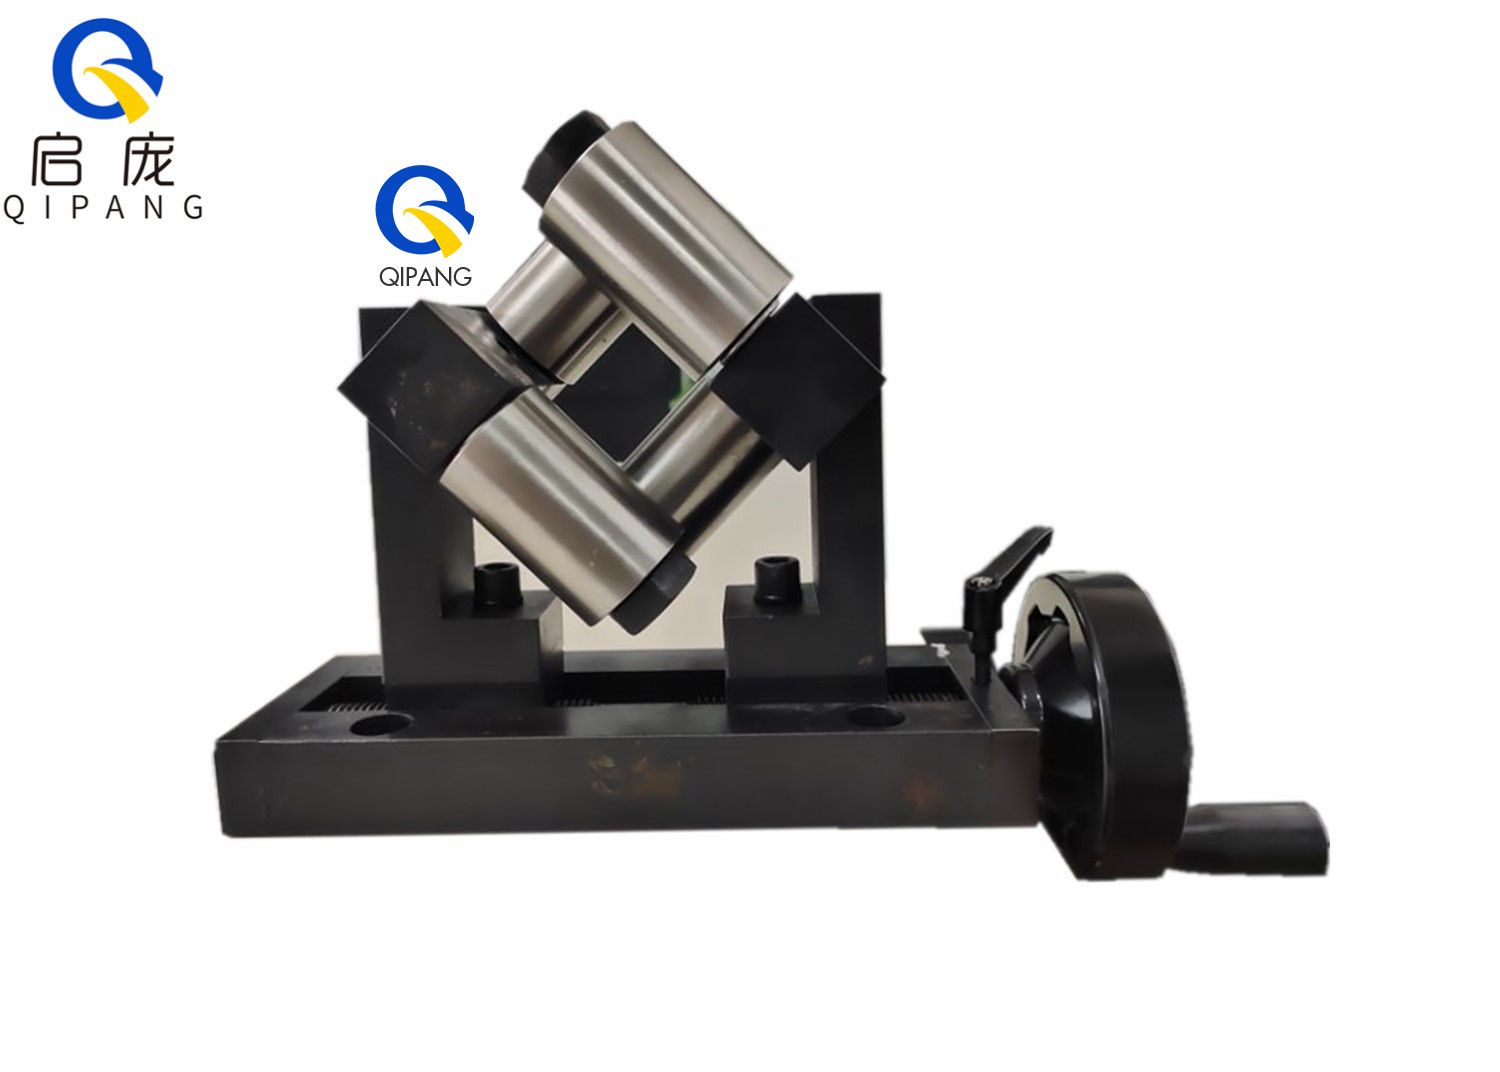 QIPANG The adjustable wire device of sloping roll is used to manually adjust the wire crossing frame, thick wire wire connecting frame, 100mm wire crossing devi